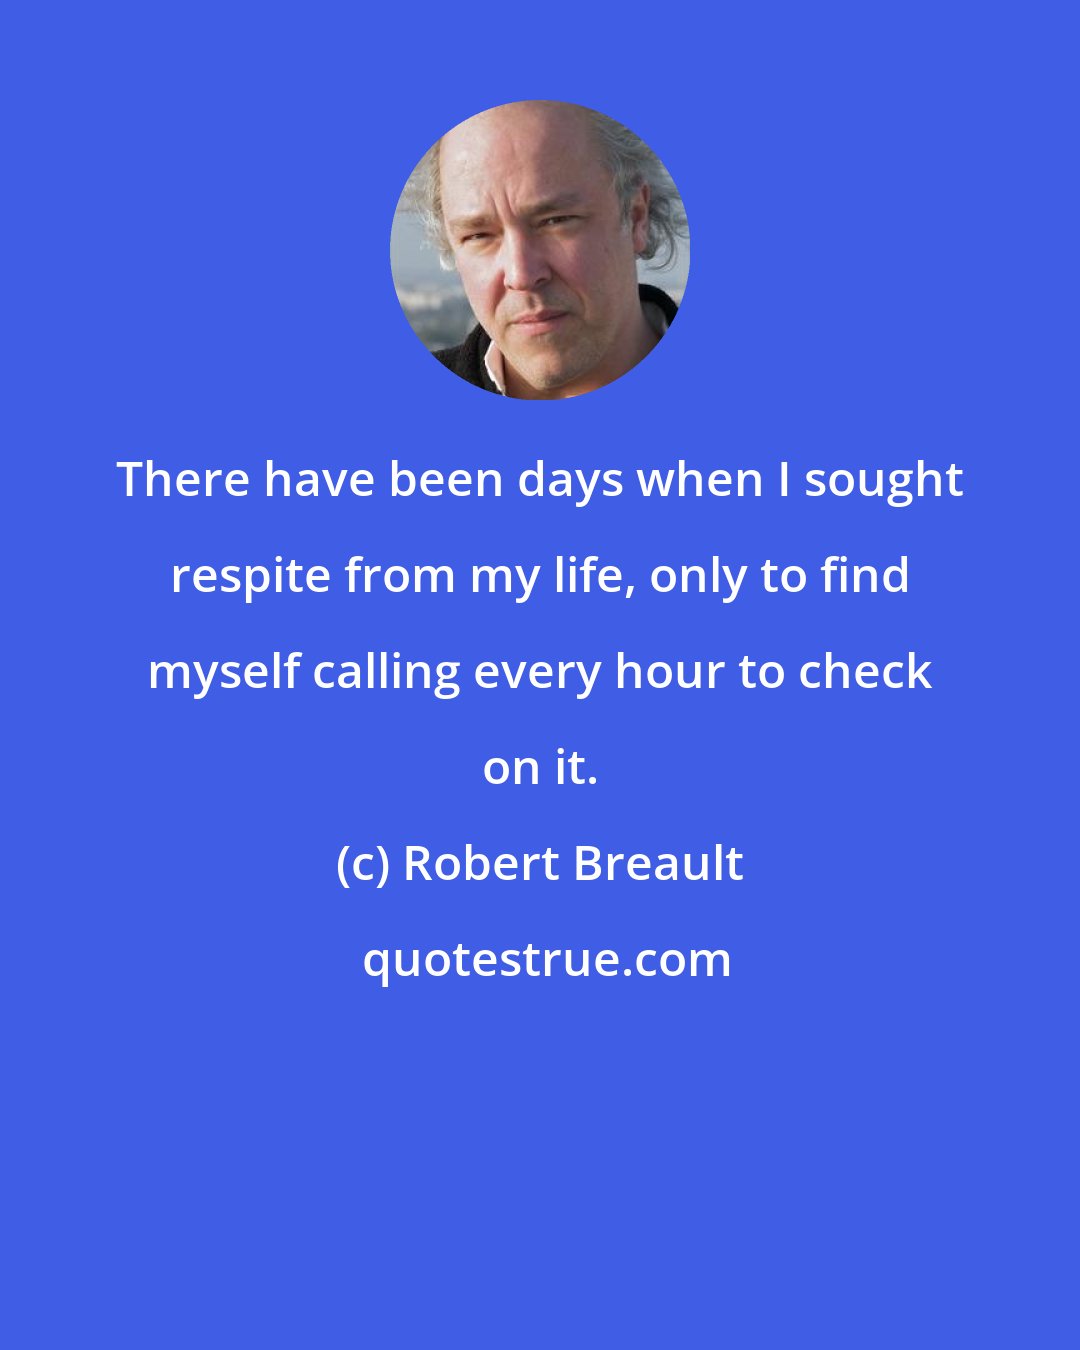 Robert Breault: There have been days when I sought respite from my life, only to find myself calling every hour to check on it.